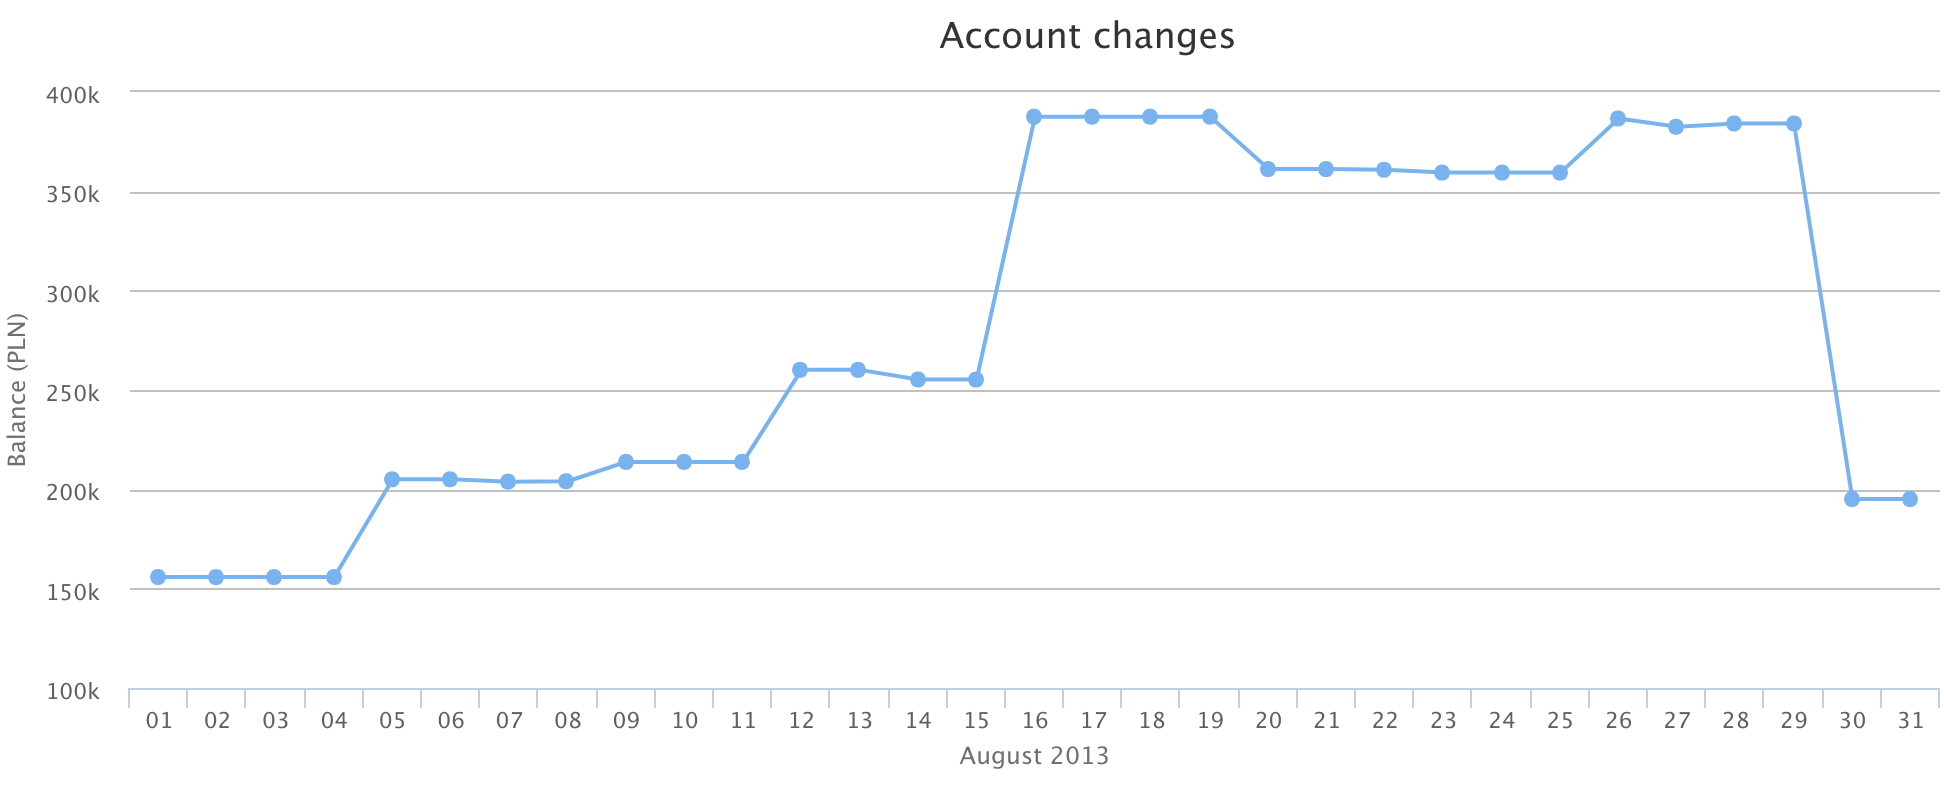 Account state in August 2013